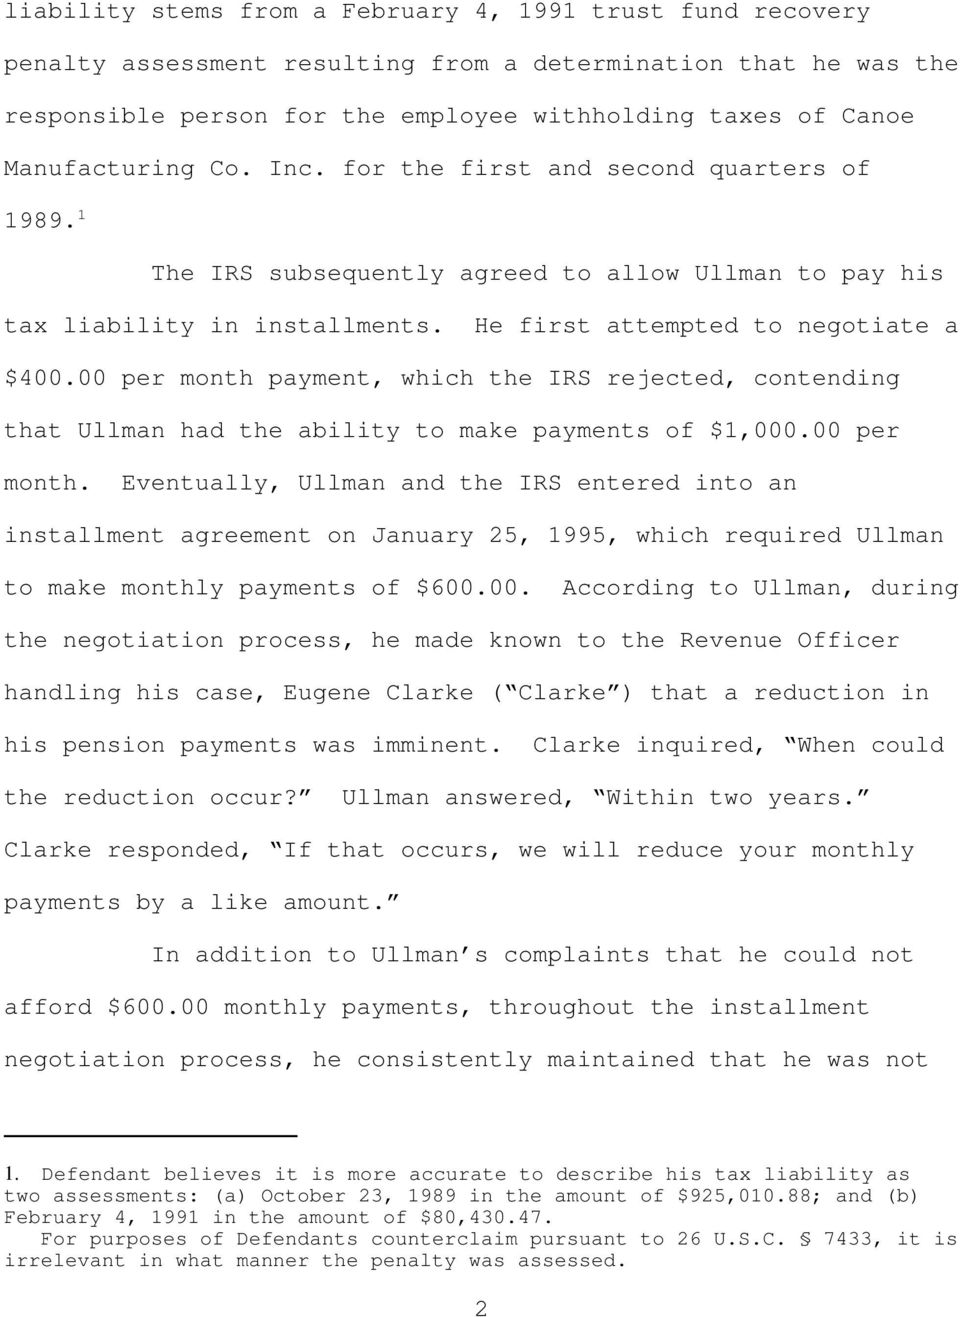 00 per month payment, which the IRS rejected, contending that Ullman had the ability to make payments of $1,000.00 per month. Eventually, Ullman and the IRS entered into an installment agreement on January 25, 1995, which required Ullman to make monthly payments of $600.